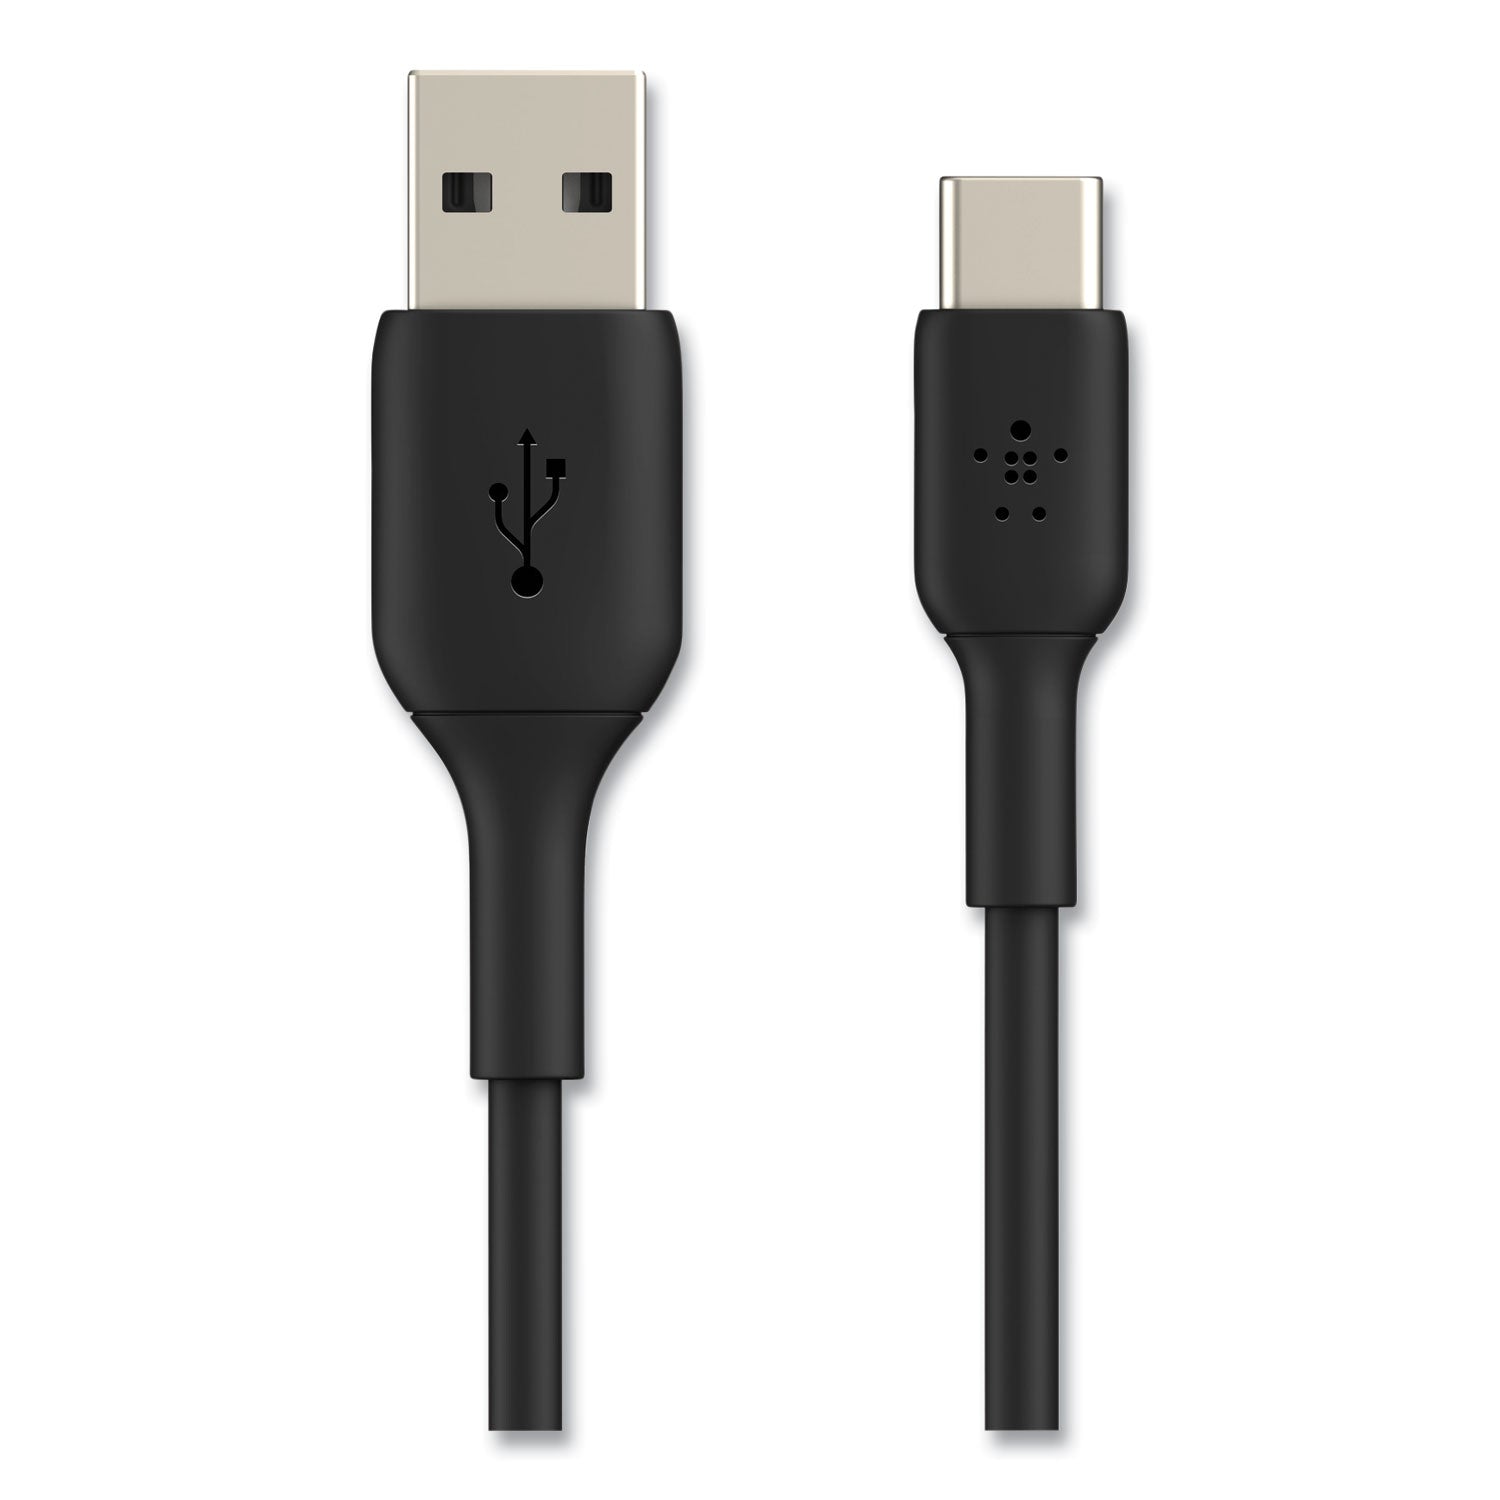 boost-charge-usb-c-to-usb-a-chargesync-cable-33-ft-black_blkcab001bt1mbk - 1